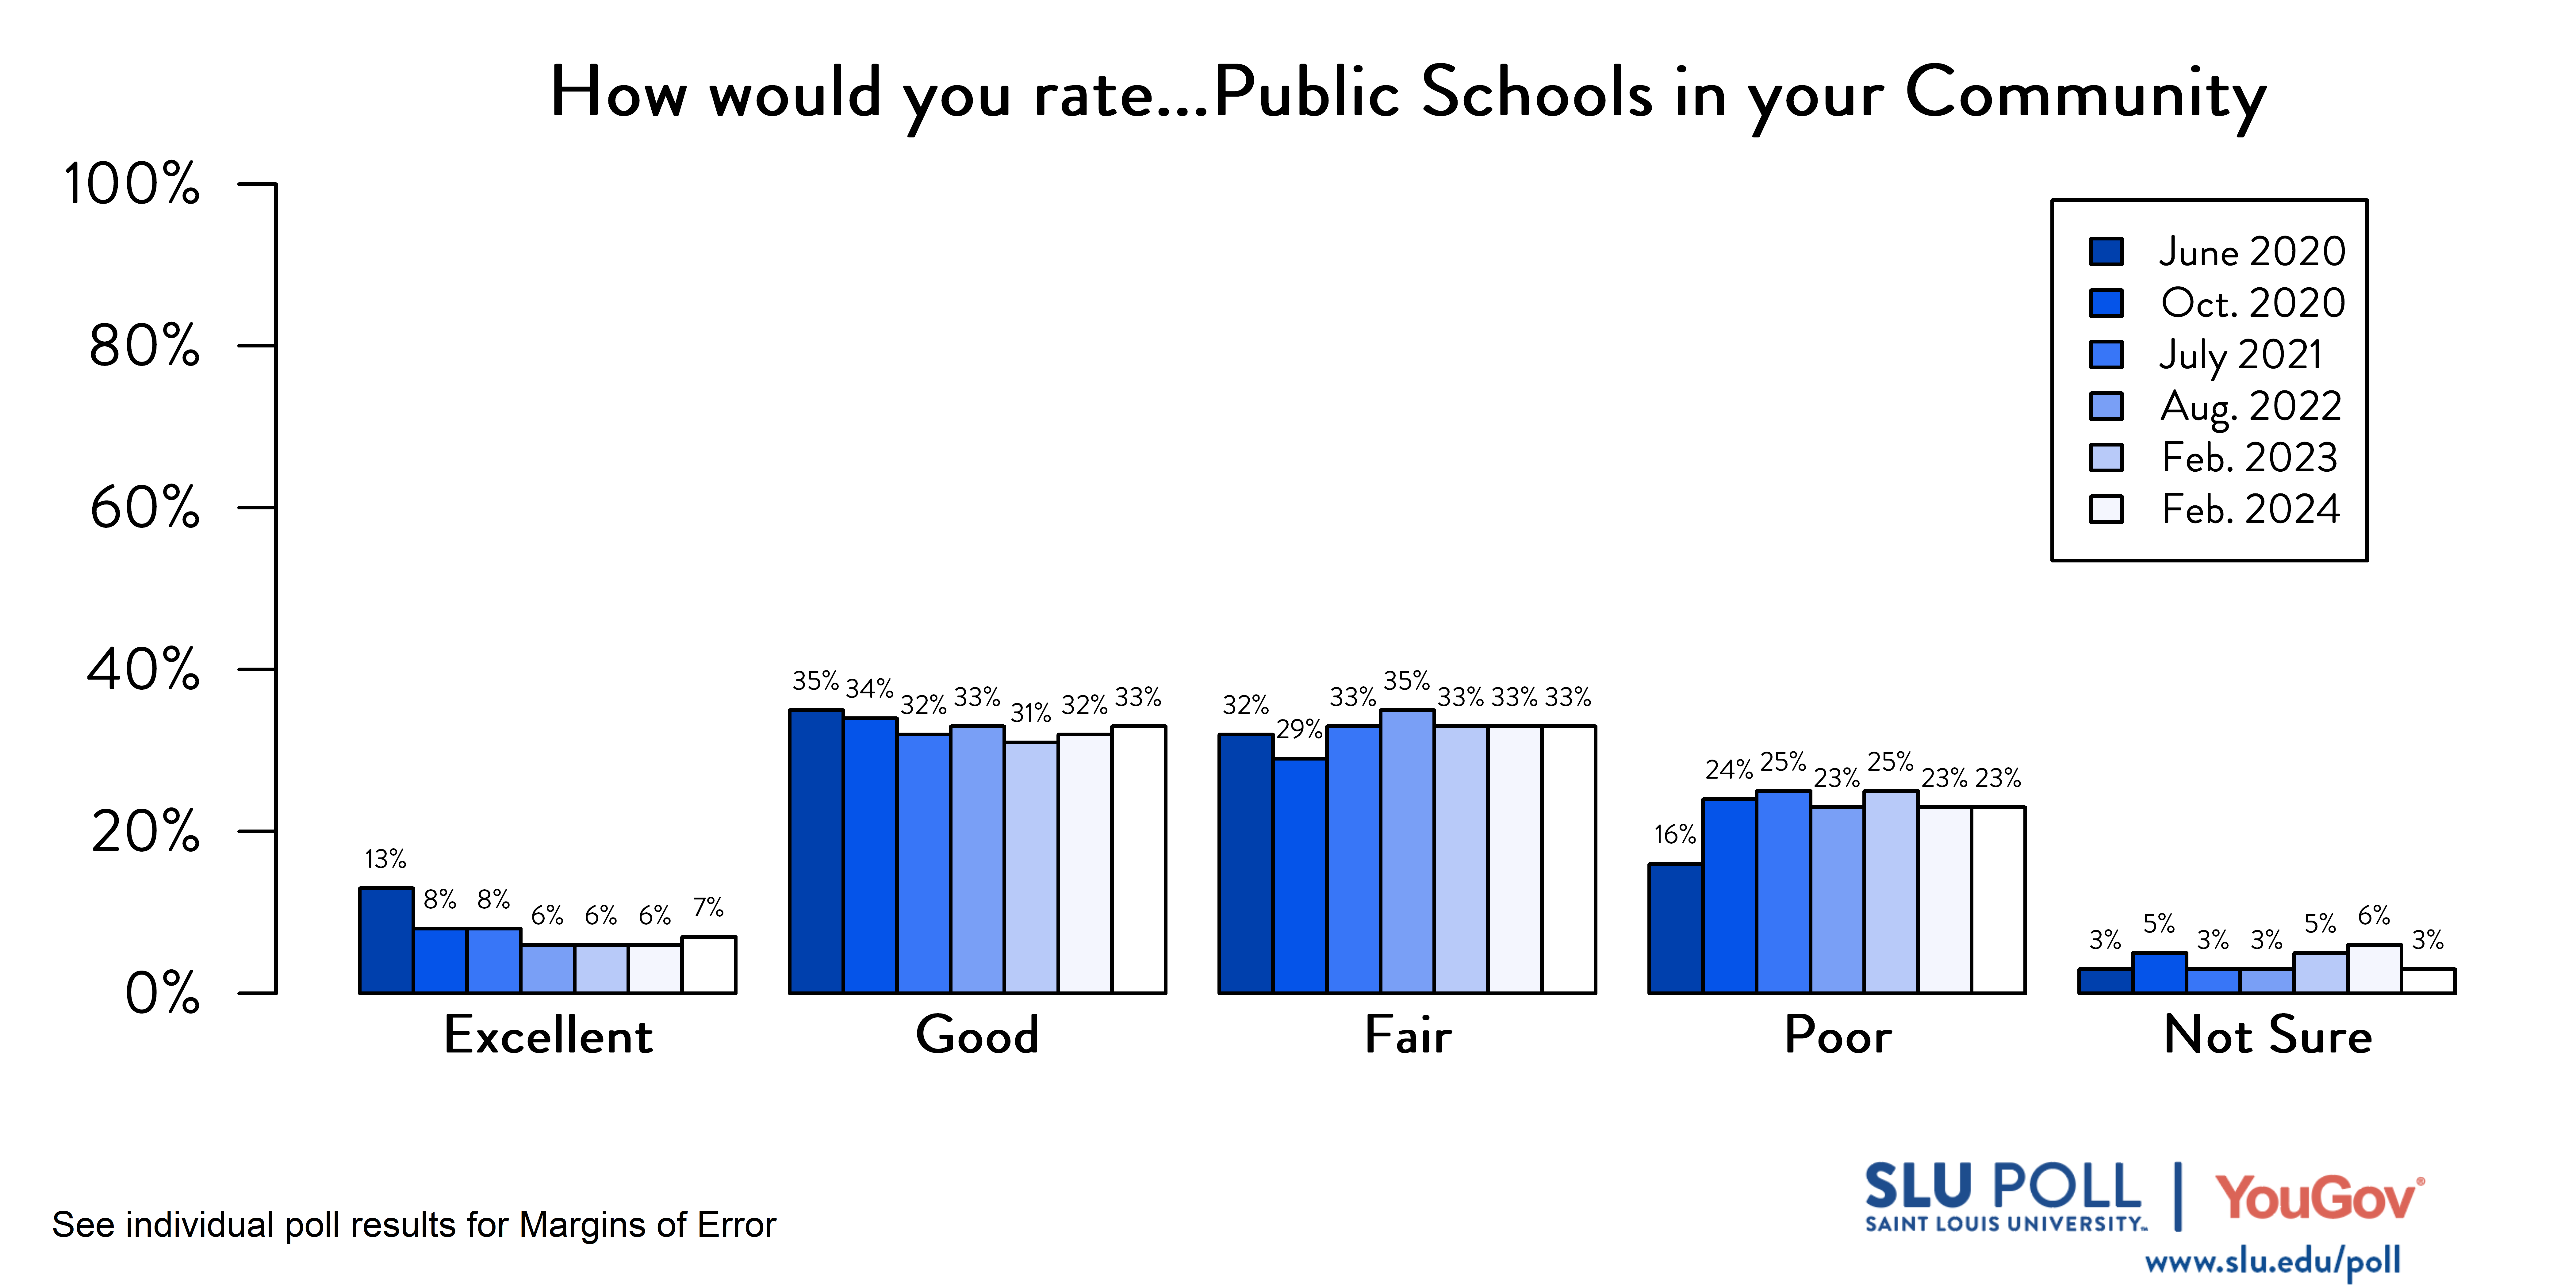 Likely voters' responses to 'How would you rate the condition of the following…Public schools in your community?'. June 2020 Voter Responses 13% Excellent, 35% Good, 32% Fair, 16% Poor, and 3% Not Sure. October 2020 Voter Responses: 8% Excellent, 34% Good, 29% Fair, 24% Poor, and 5% Not sure. July 2021 Voter Responses: 8% Excellent, 32% Good, 33% Fair, 25% Poor, and 3% Not sure. August 2022 Voter Responses: 6% Excellent, 33% Good, 35% Fair, 23% Poor, and 3% Not sure. February 2023 Voter Responses: 6% Excellent, 31% Good, 33% Fair, 25% Poor, and 5% Not sure. February 2024 Voter Responses: 7% Excellent, 33% Good, 33% Fair, 23% Poor, and 3% Not sure.